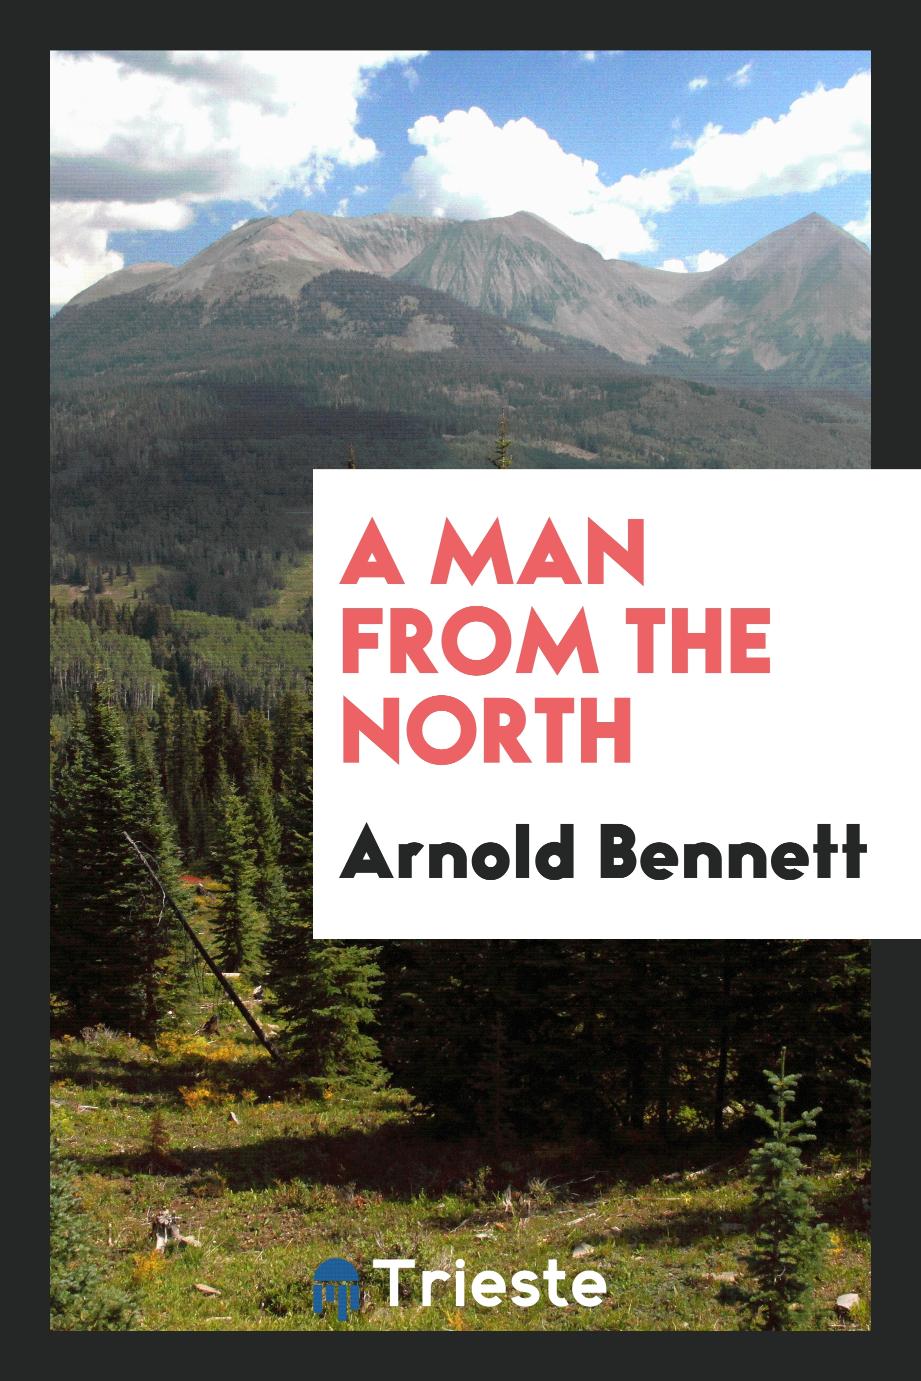 A Man from the North